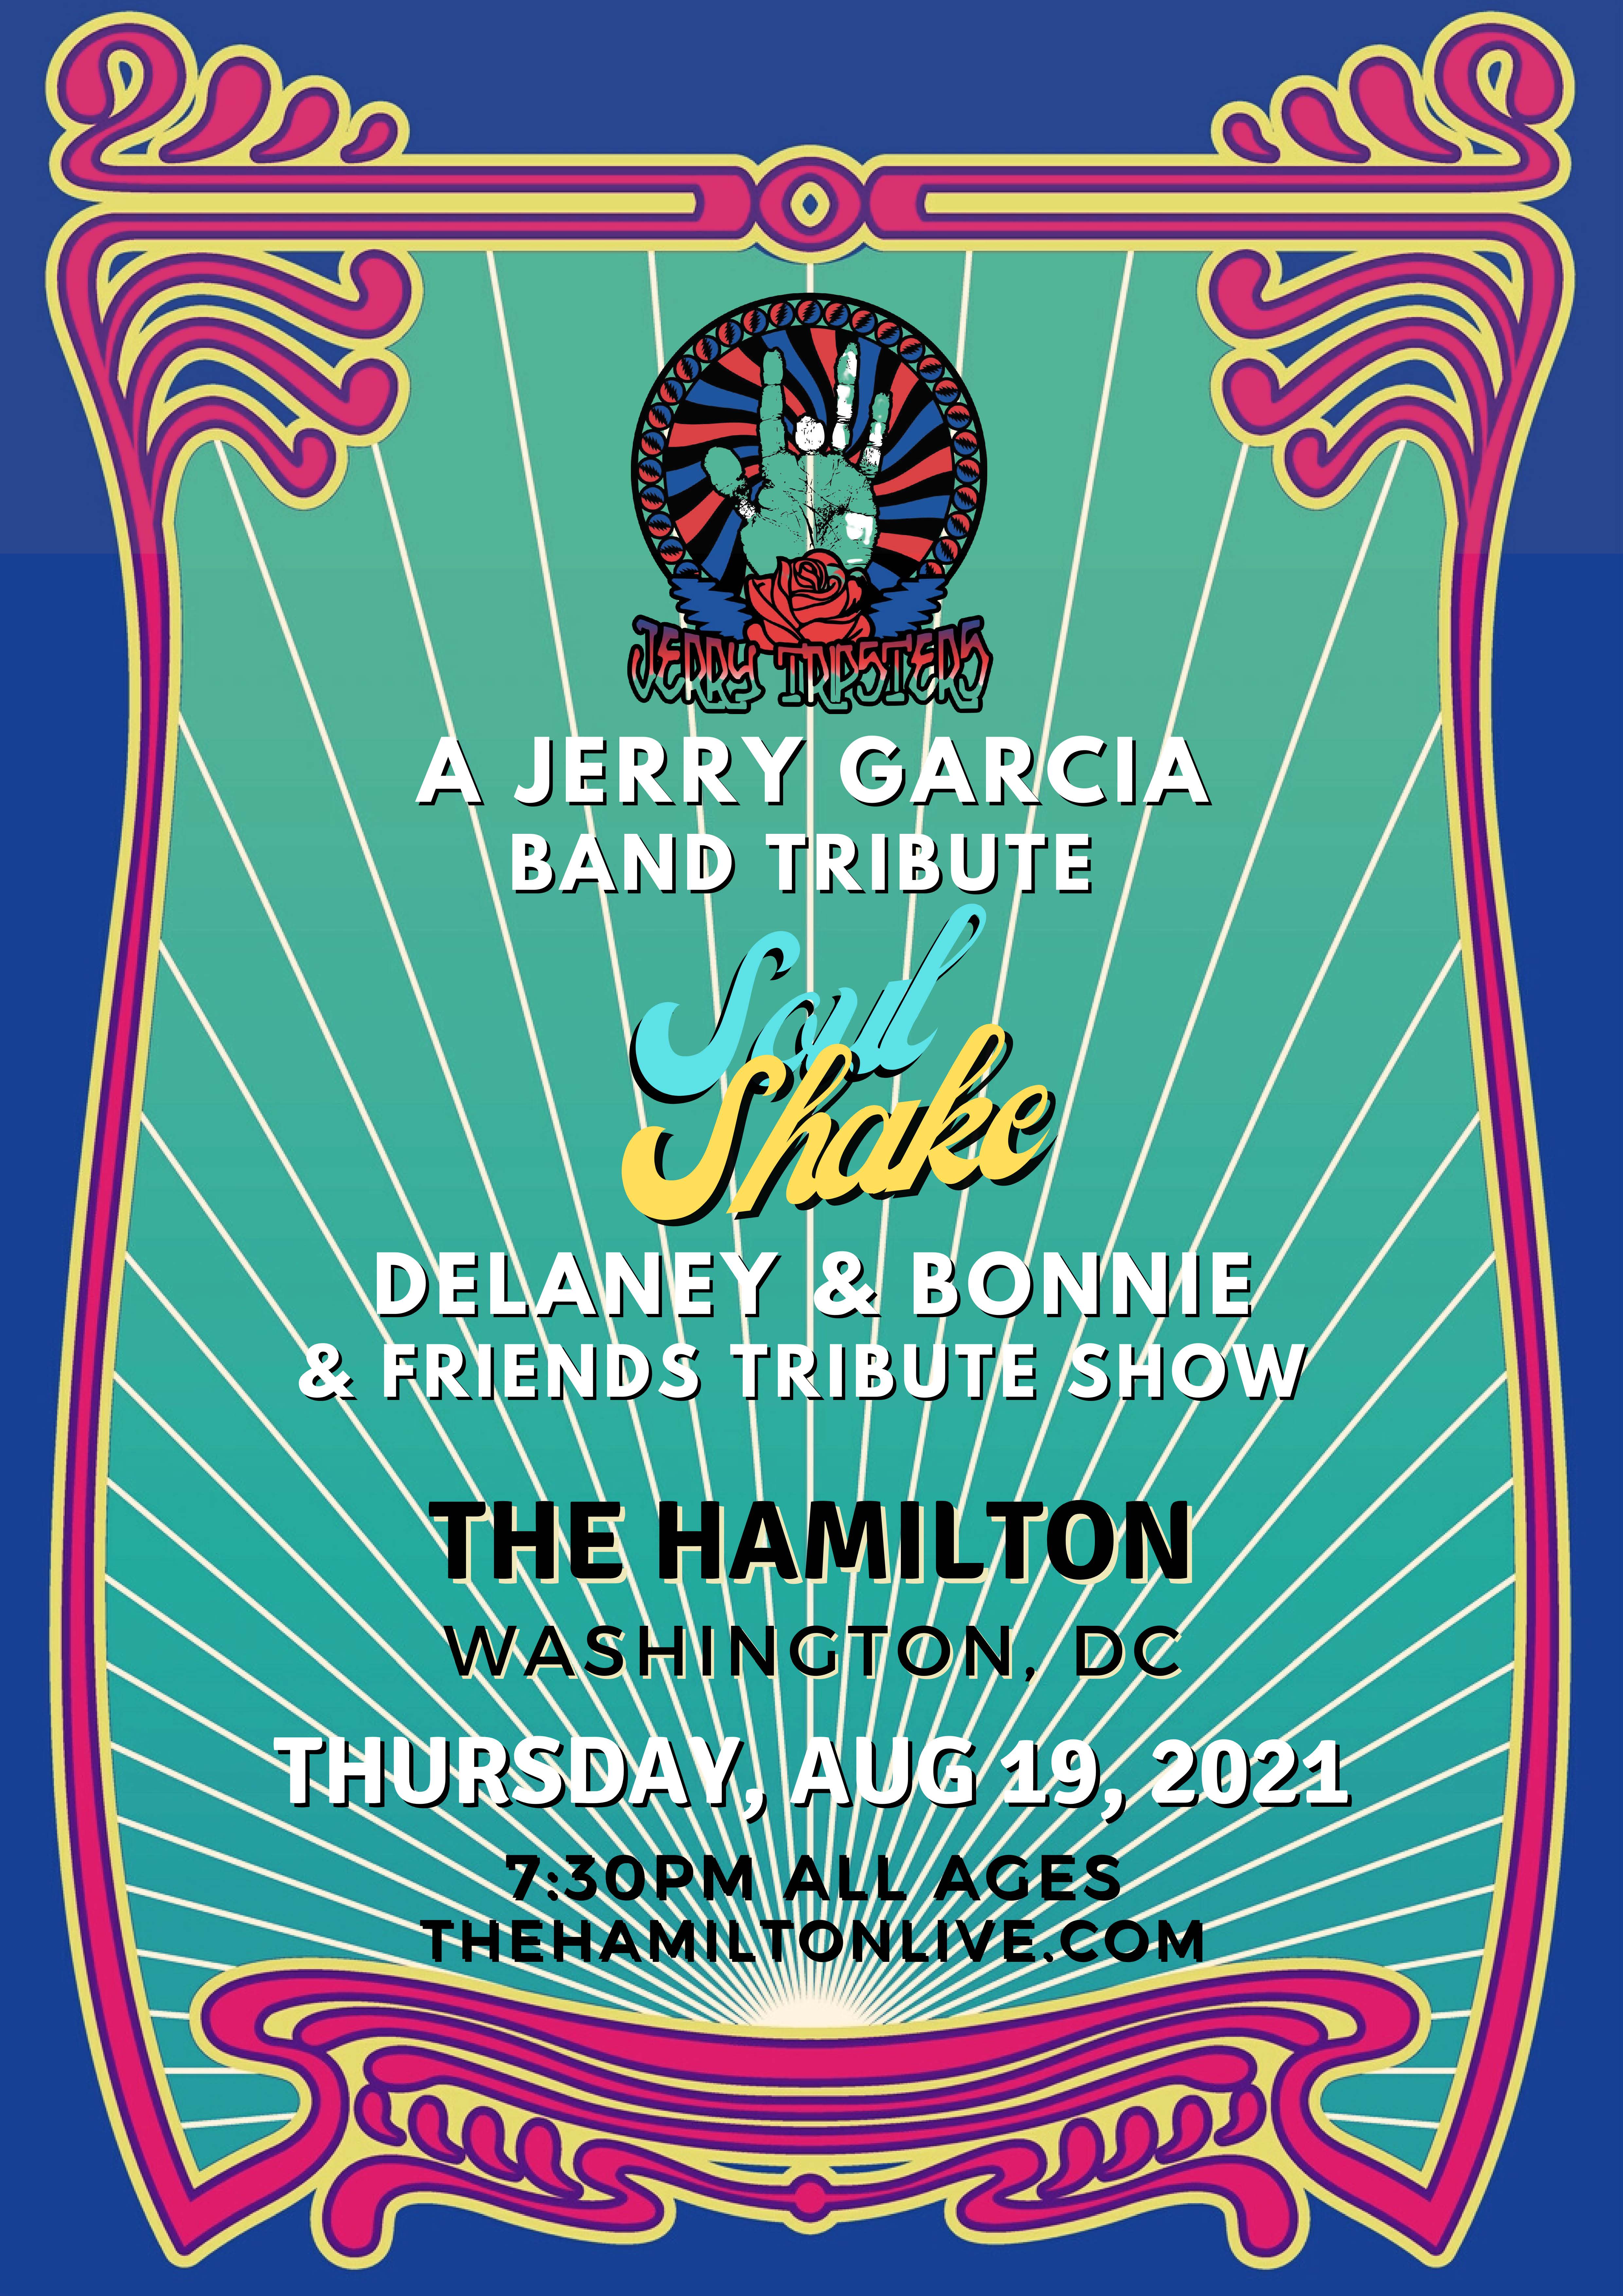 The Jerry Tripsters and Soul Shake @ The Hamilton | 8/19/21